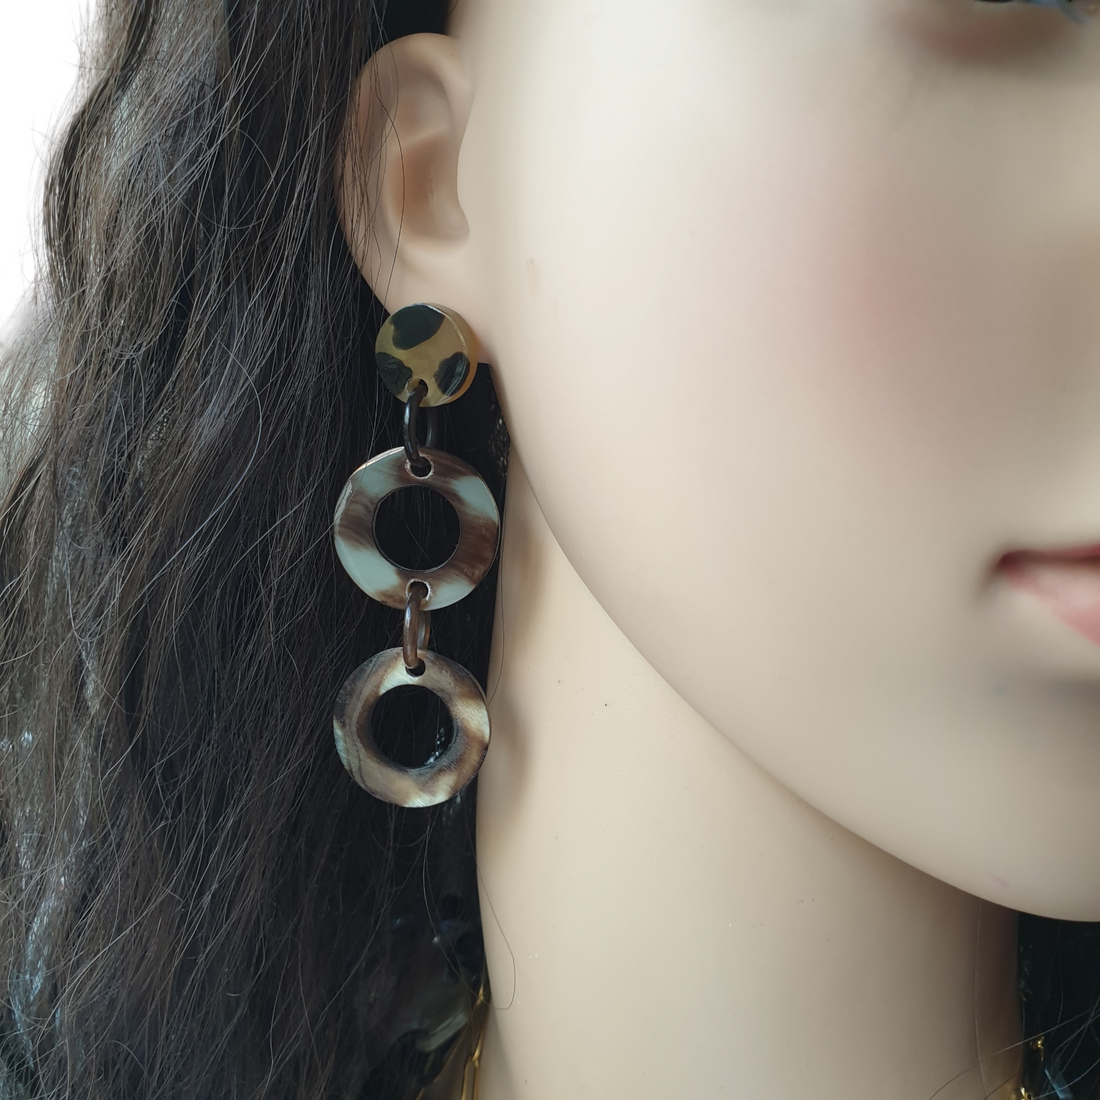 Bohemian Minimalist drop earrings feature spotted leopard details in natural buffalo horn for women's gifts